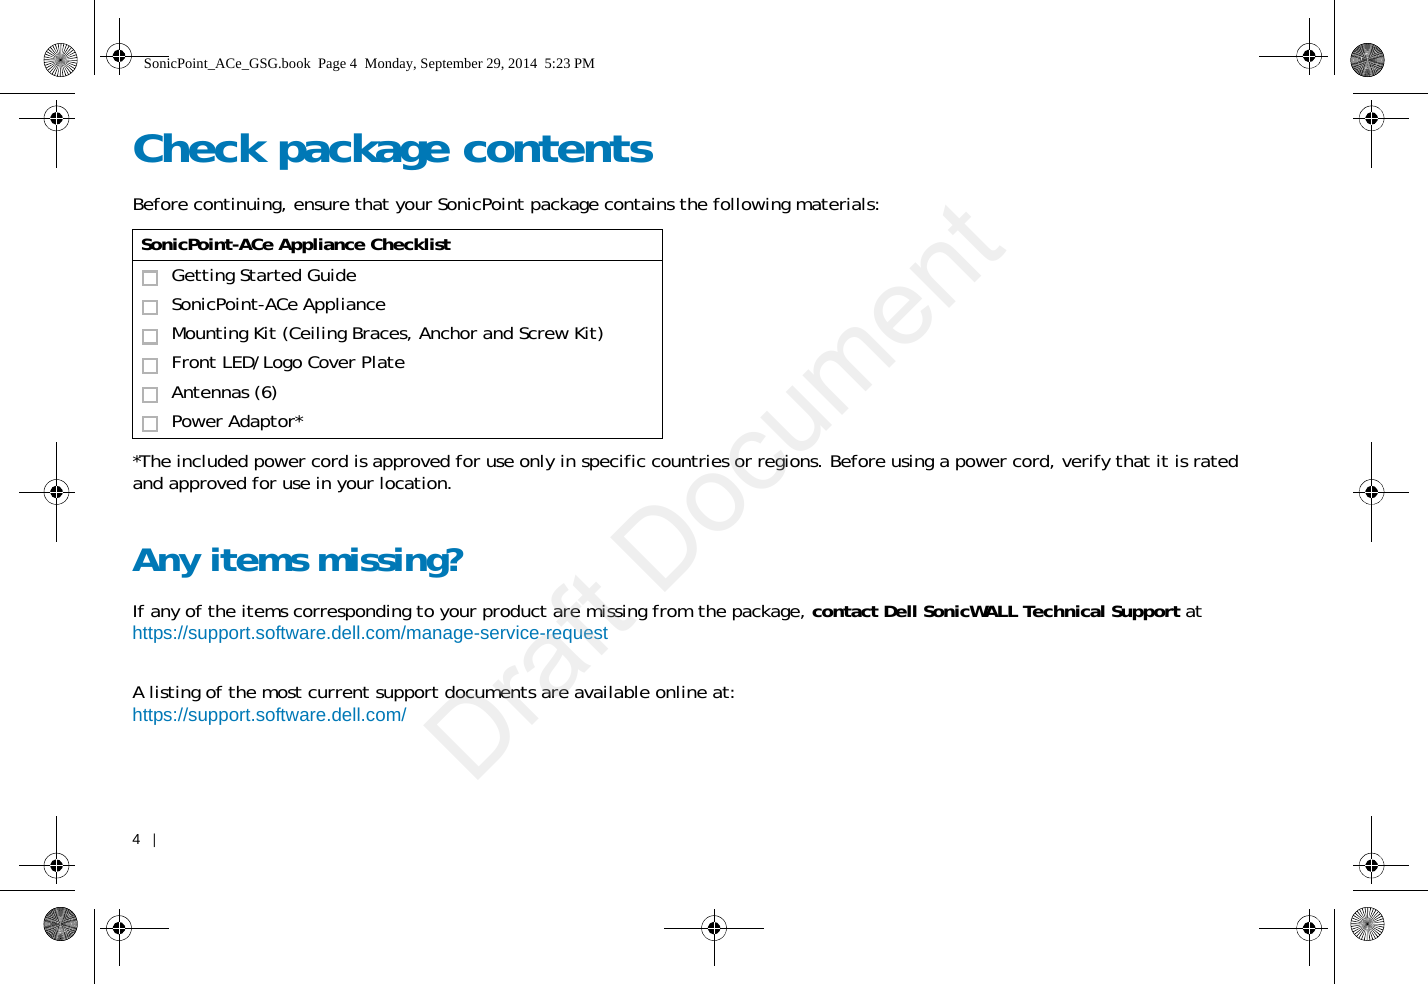 4   |   Check package contentsBefore continuing, ensure that your SonicPoint package contains the following materials: *The included power cord is approved for use only in specific countries or regions. Before using a power cord, verify that it is rated and approved for use in your location.Any items missing?If any of the items corresponding to your product are missing from the package, contact Dell SonicWALL Technical Support at https://support.software.dell.com/manage-service-request A listing of the most current support documents are available online at: https://support.software.dell.com/SonicPoint-ACe Appliance ChecklistGetting Started Guide SonicPoint-ACe ApplianceMounting Kit (Ceiling Braces, Anchor and Screw Kit)Front LED/Logo Cover PlateAntennas (6)Power Adaptor*SonicPoint_ACe_GSG.book  Page 4  Monday, September 29, 2014  5:23 PMDraft Document